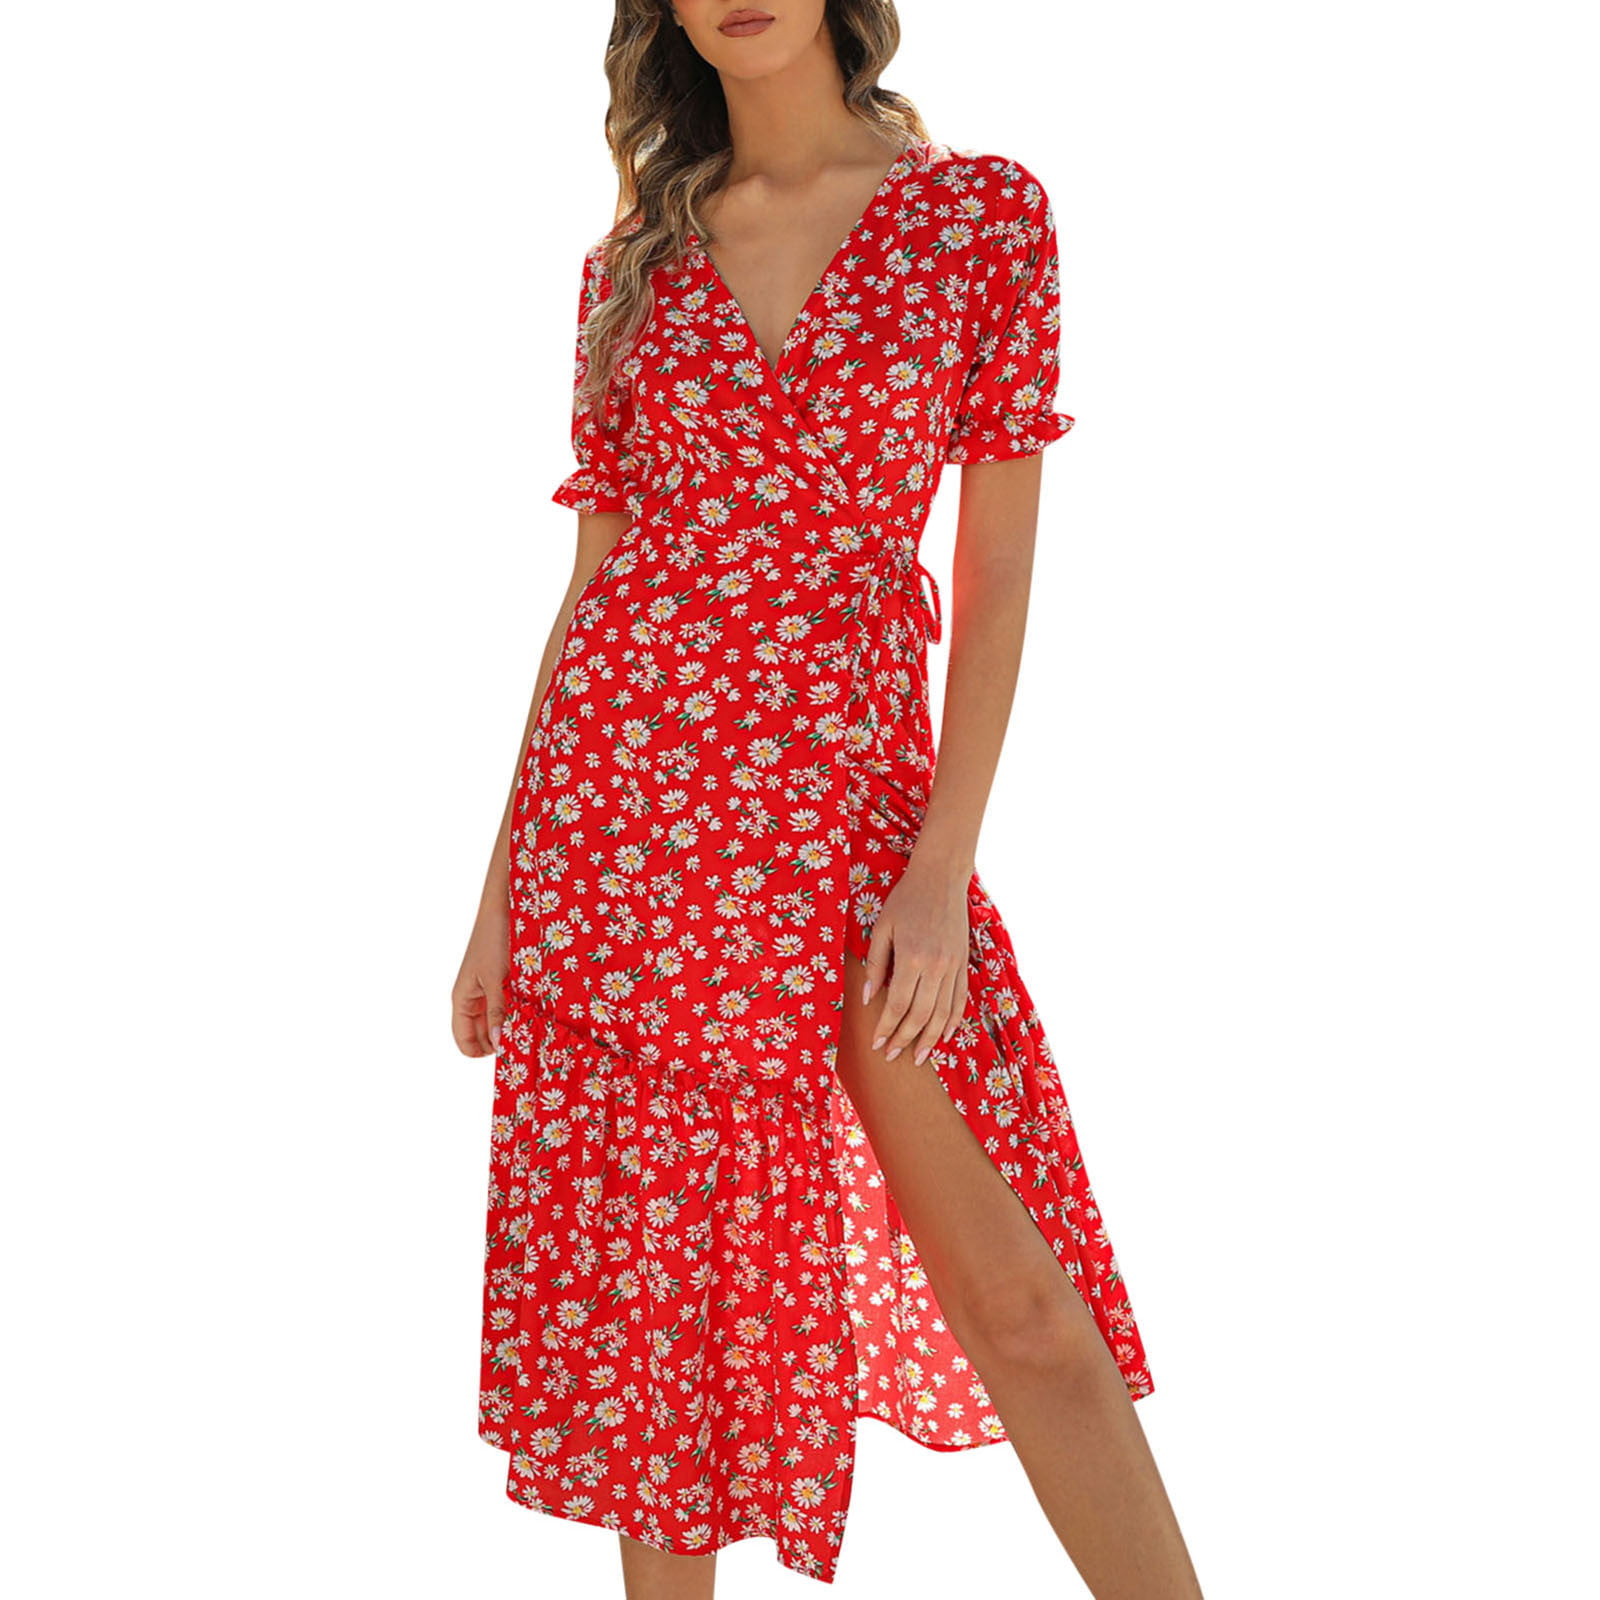 HSMQHJWE Vestidos Pegados Para Mujer Knit Dress Women'S Casual Fashion  Dress Floral Printed Bohemian V-Neck Elegant Dress A-Line Printed Short  Sleeve Casual Dress High Low Dresses For Wome 